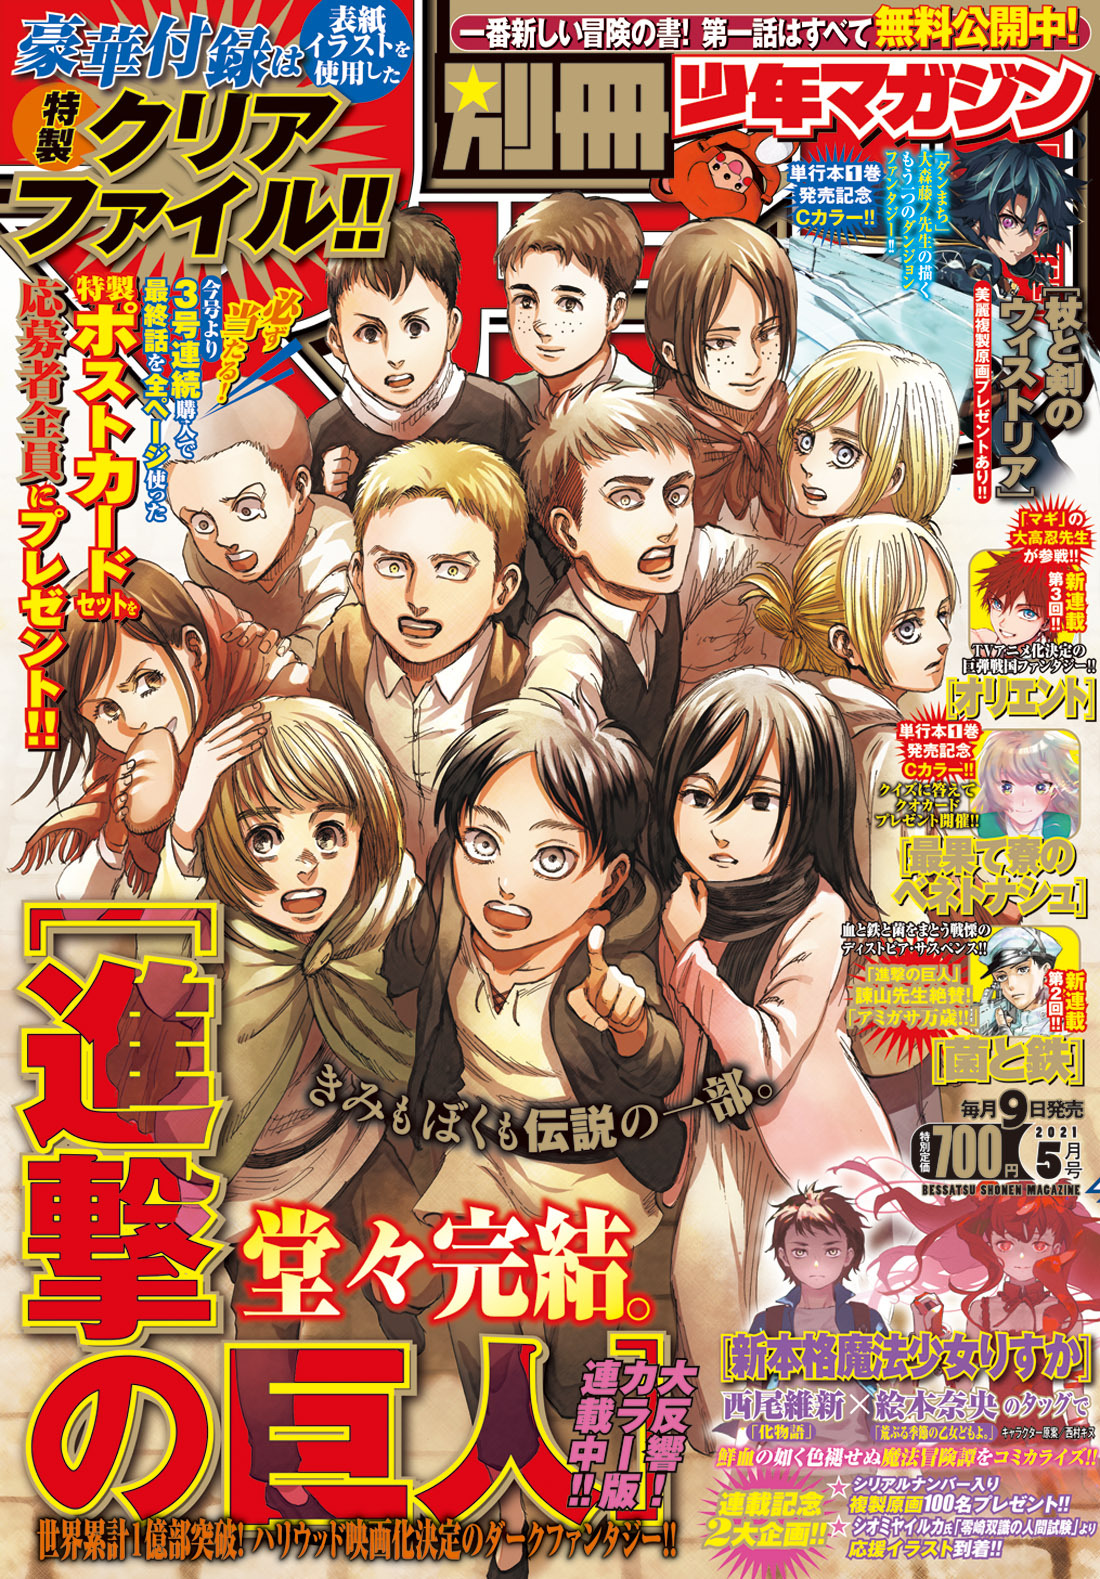 The cover of the last episode.